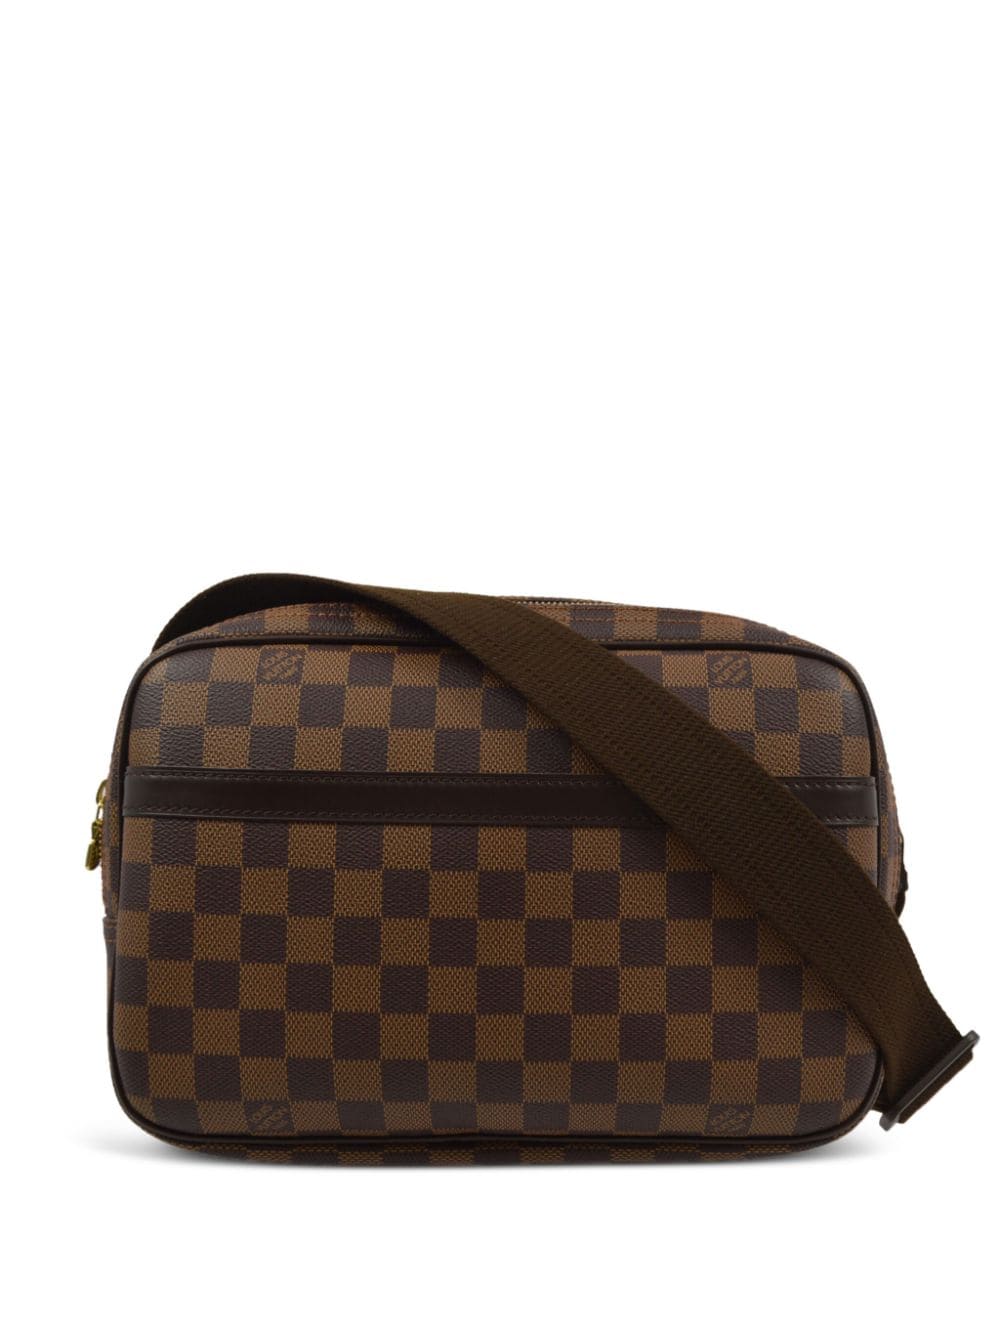 Louis Vuitton Pre-Owned 2010 Reporter PM Schultertasche - Braun von Louis Vuitton Pre-Owned